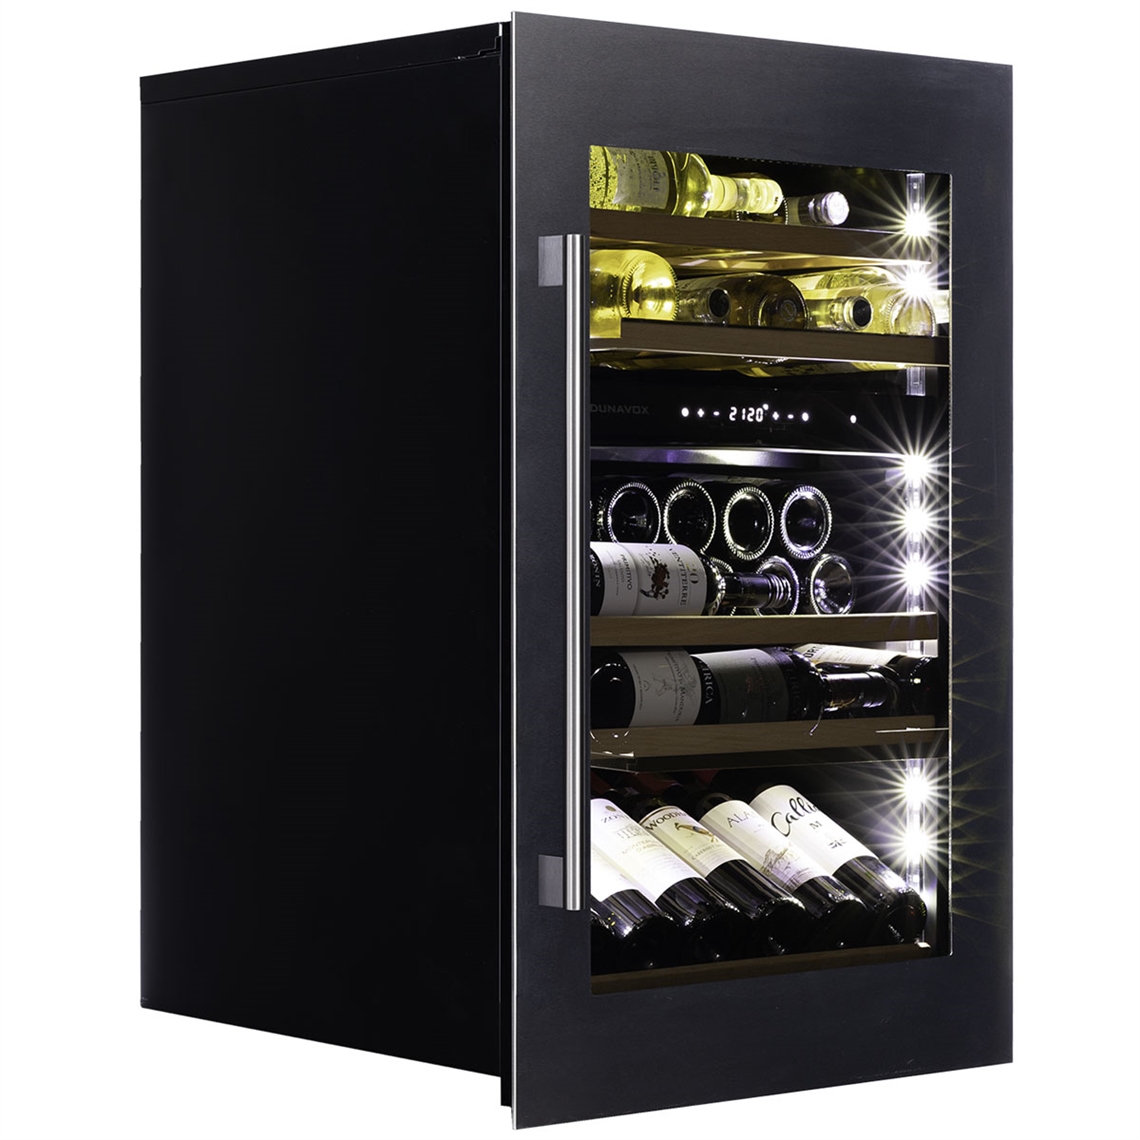 Dunavox Wine Cabinet Soul - 2-Temperature Slot-In - Stainless Steel DAVS-49.116DSS